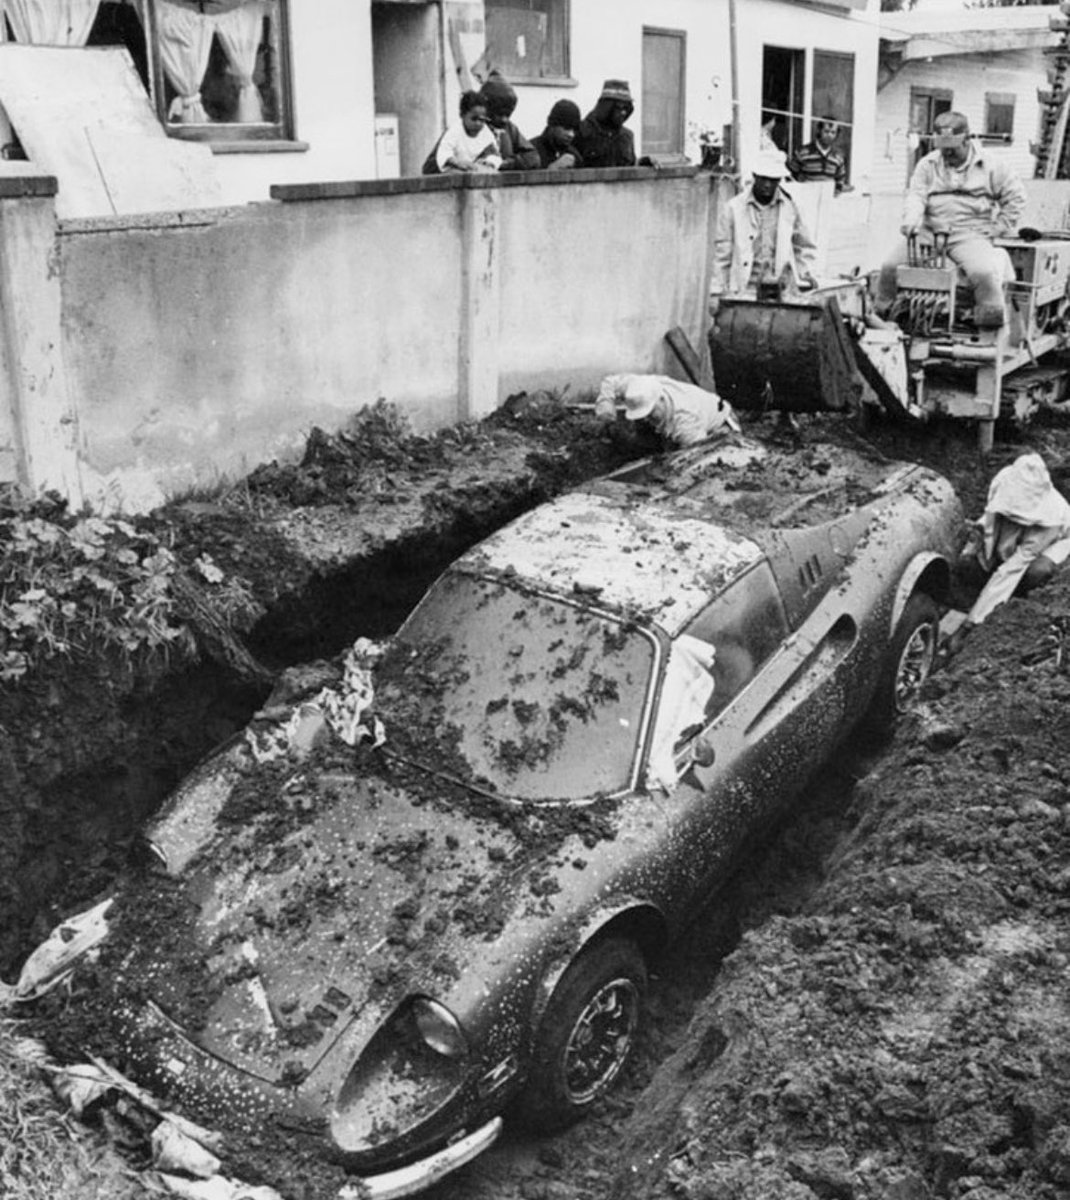 In 1978 a Ferrari was discovered buried in a yard in Los Angeles after children playing in the dirt alerted police about something shallowly buried. The car had been reported stolen 4 years prior.

Later it transpired that the owner, plumber Rosendo Cruz, apparently conspired to